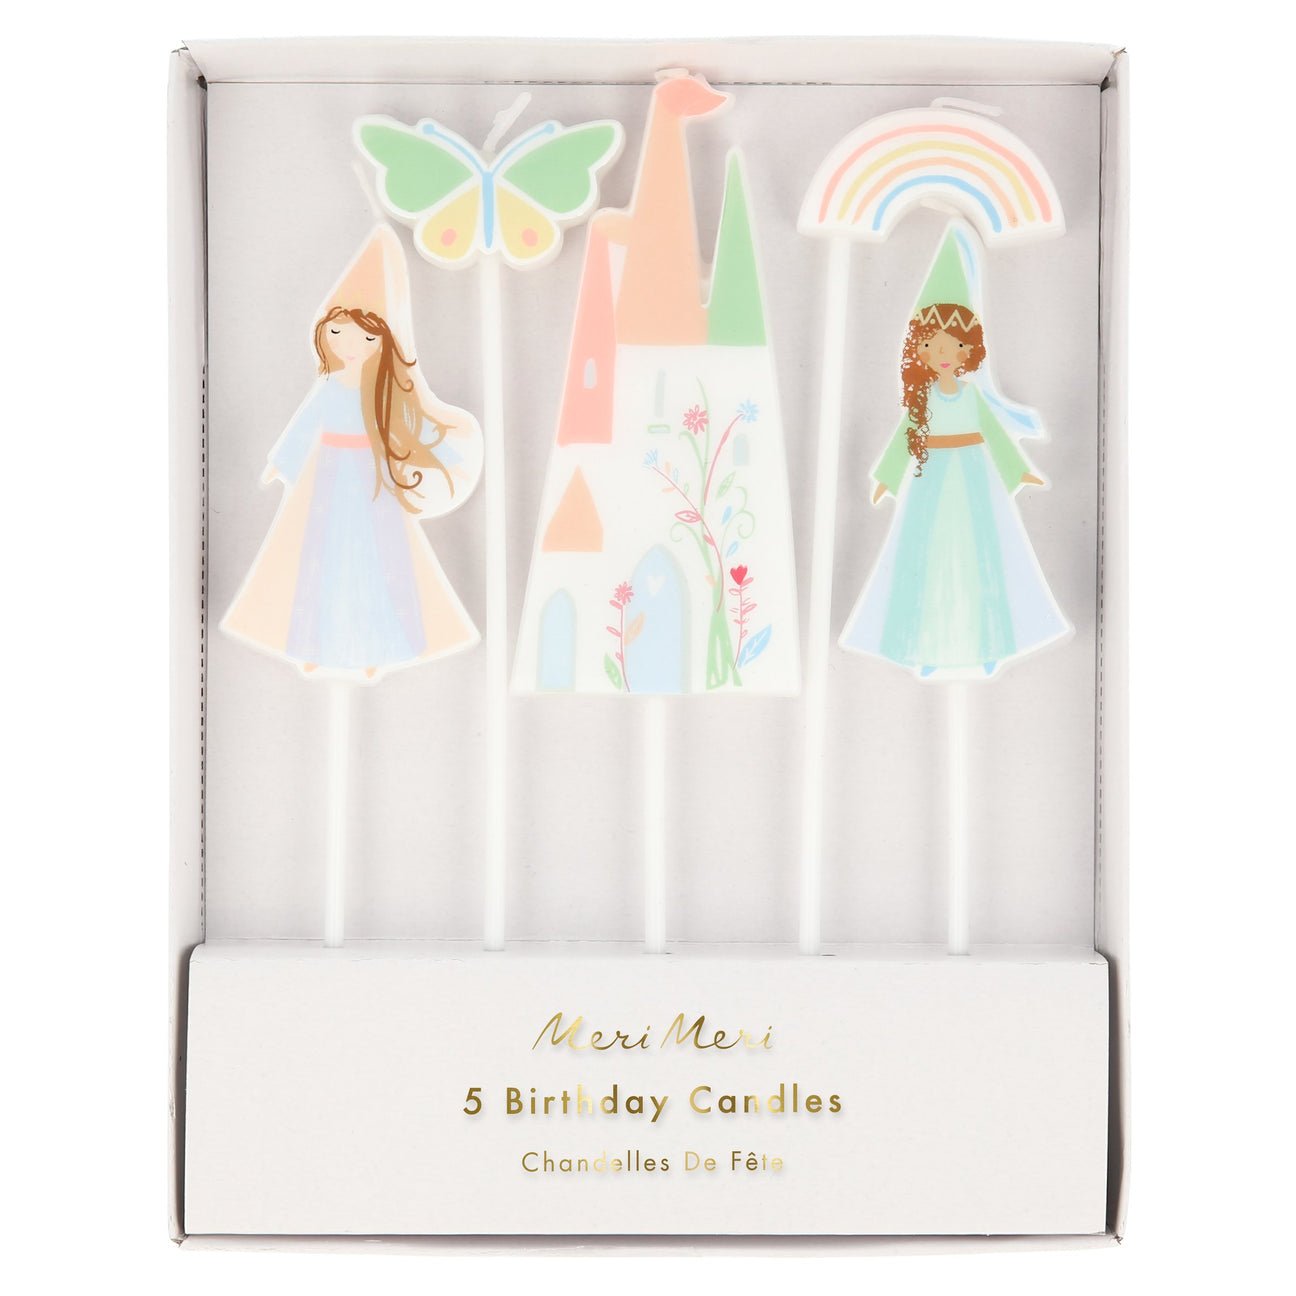 Magical Princess Candles - Oh My Darling Party Co-215875birthday candlescandles #Fringe_Backdrop#